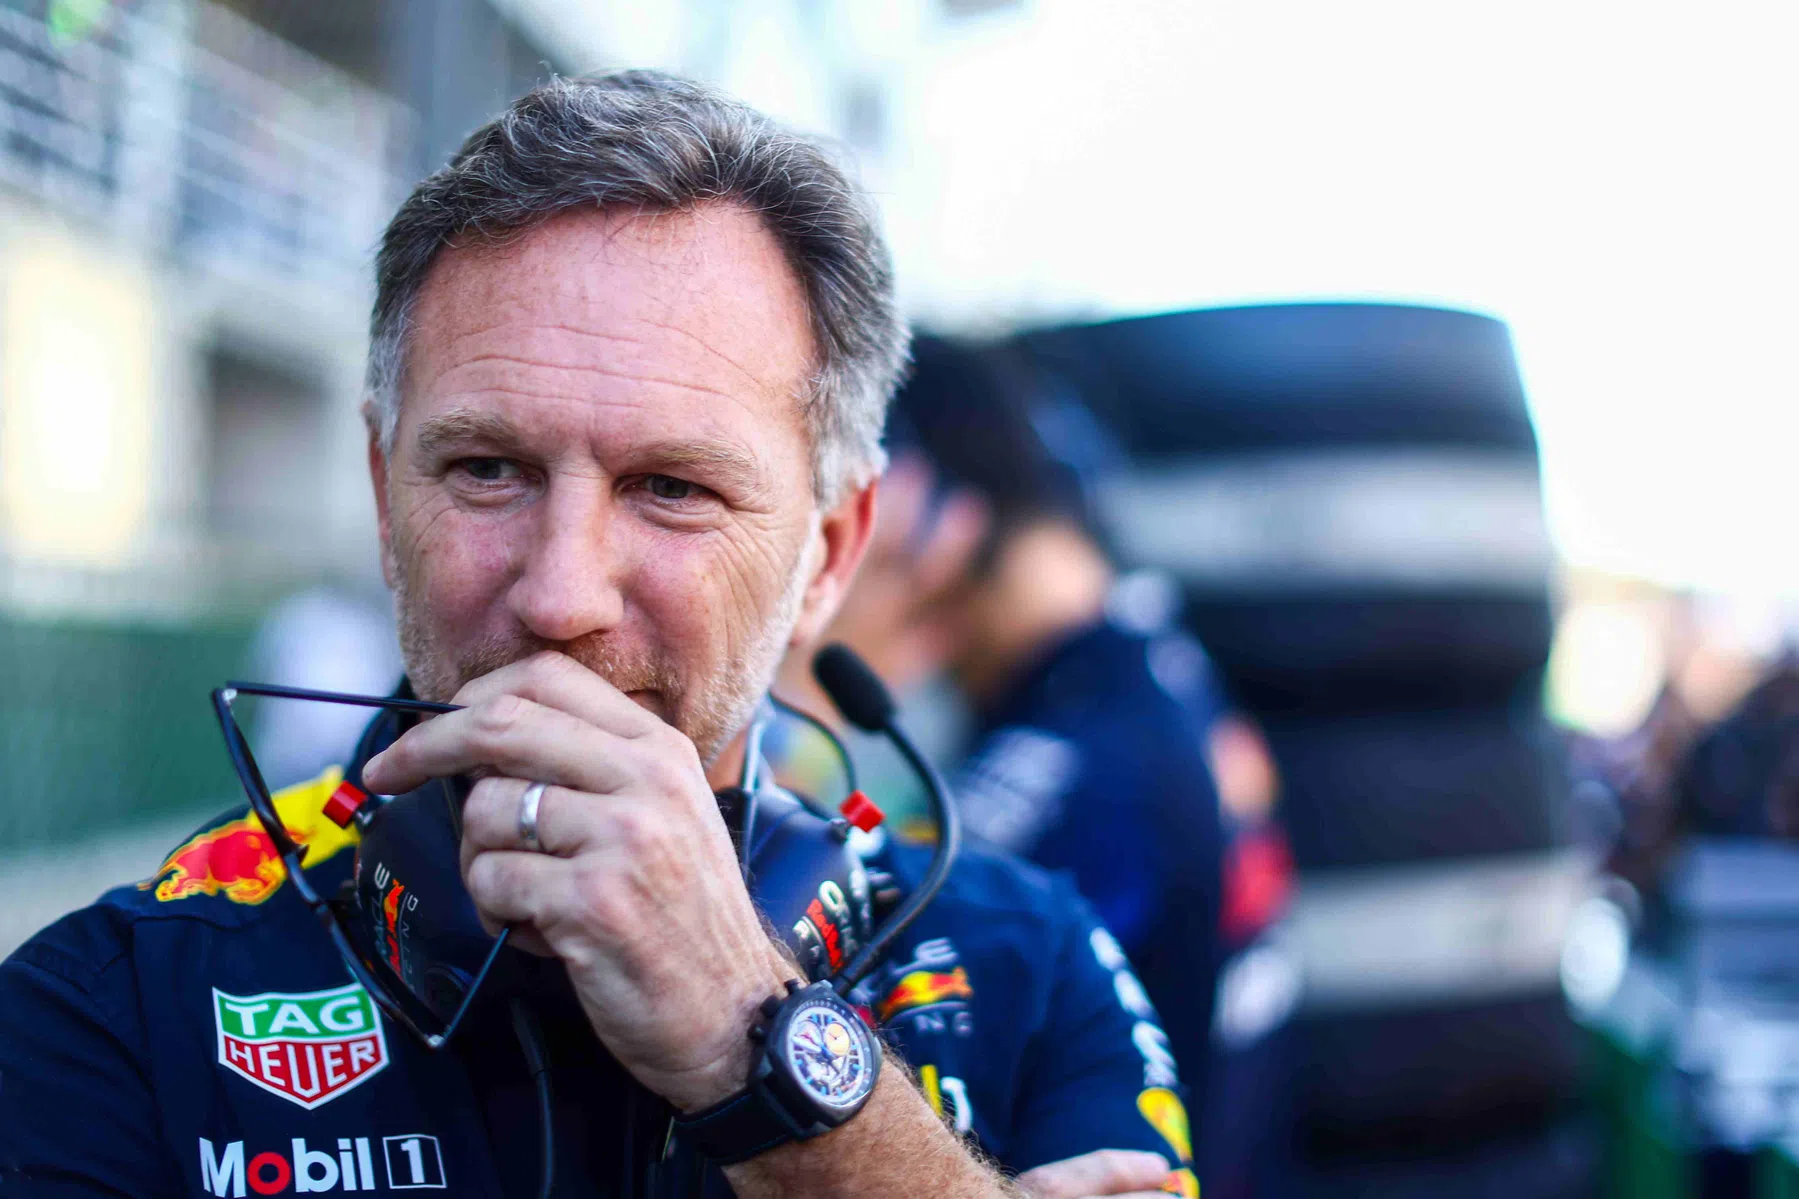 horner spoke to hamilton's father about red bull seat